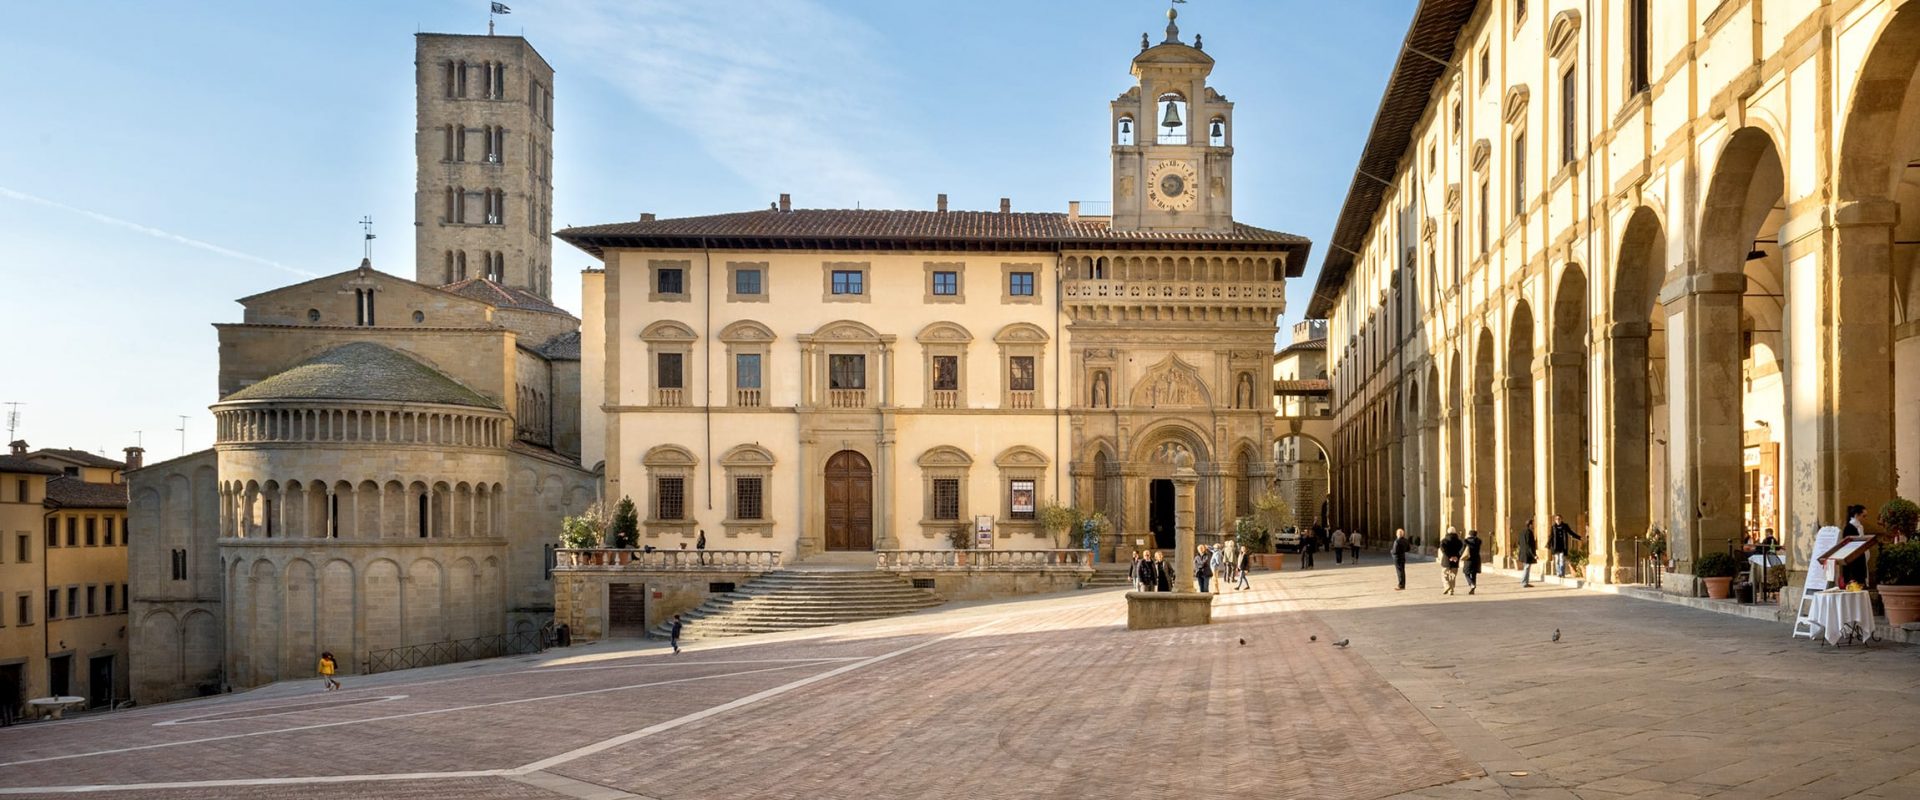 Arezzo, Italy - An insiders guide to the town of Arezzo 